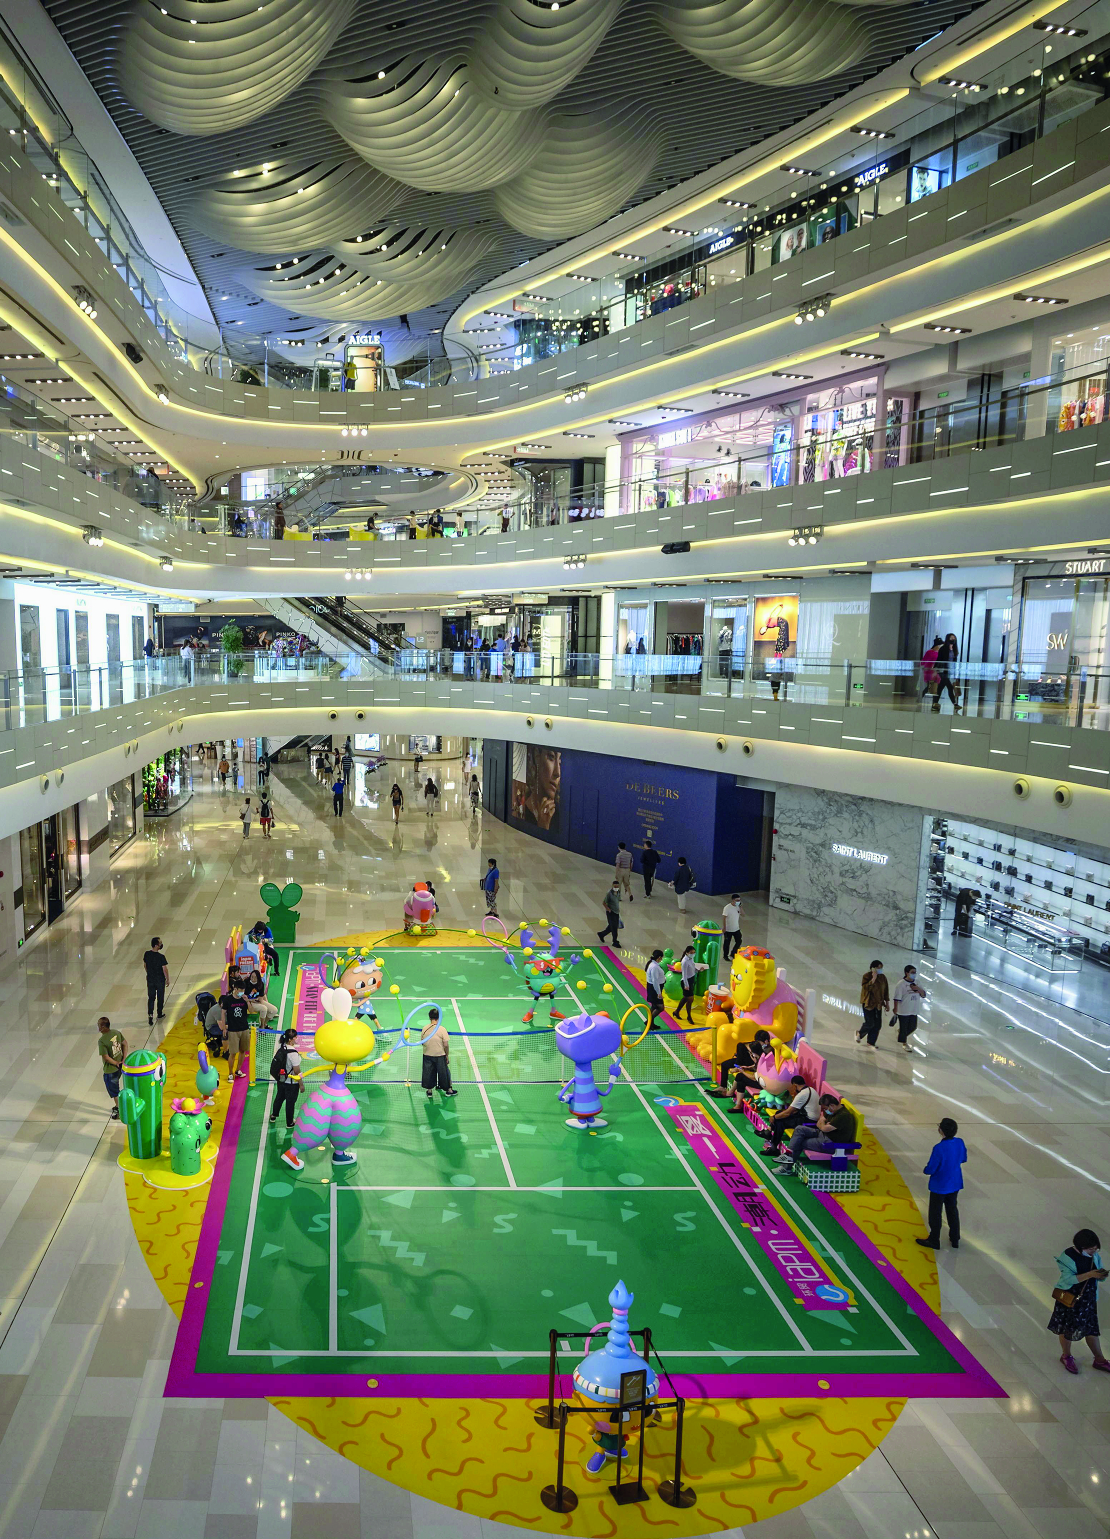 epa08548798 Visitors walk through a shopping mall with a badminton court in Shanghai, China, 15 July 2020 (issued 16 July 2020). China's gross domestic product (GDP) grew 3.2 percent in the second quarter of 2020, according to a report of the National Bureau of Statistics issued on 16 July 2020.  EPA/ALEX PLAVEVSKI ArcInfo